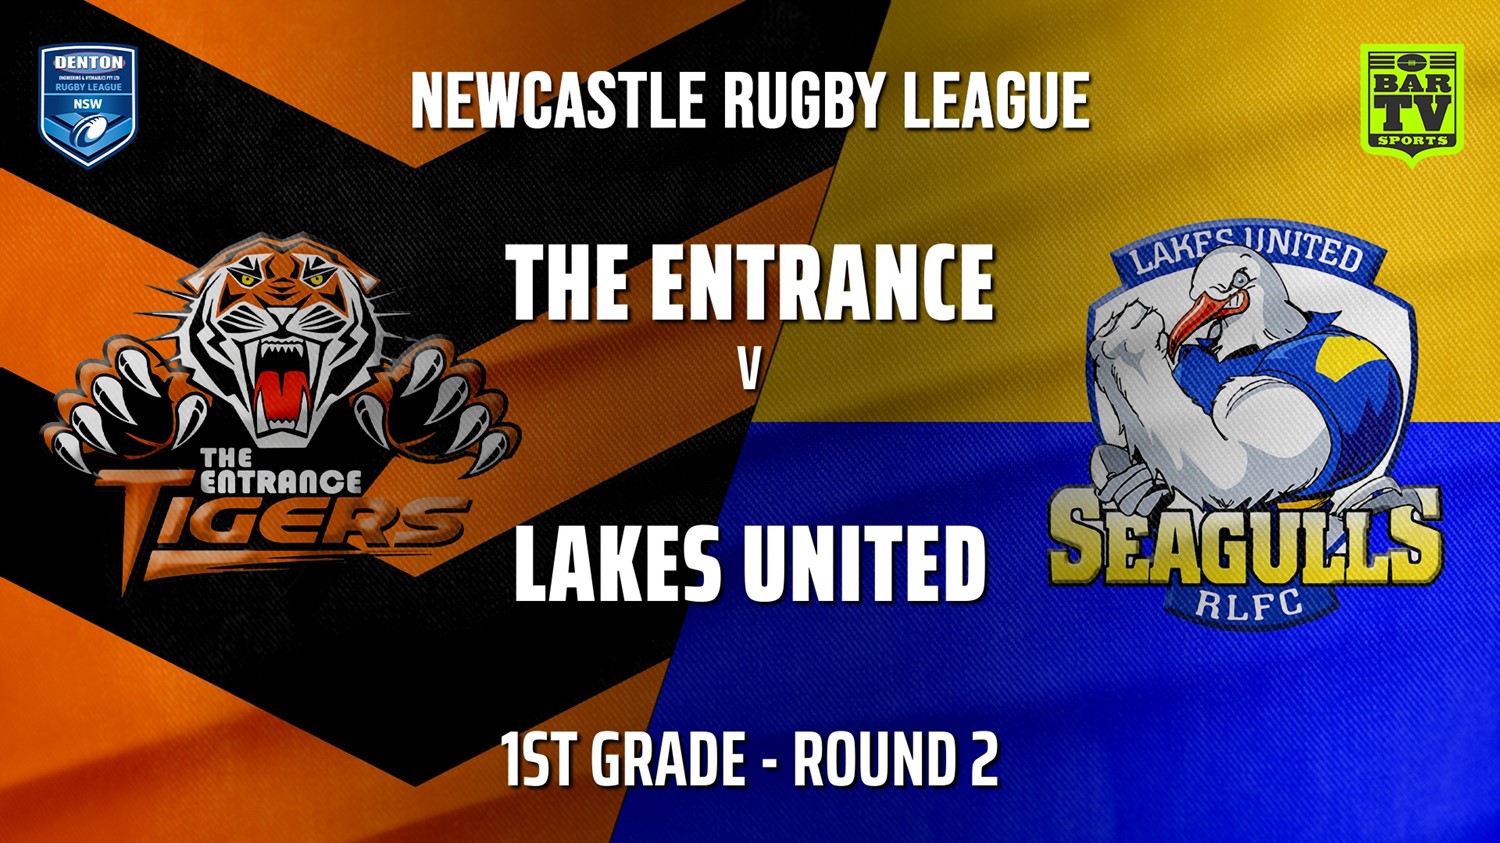 Newcastle Rugby League Round 2 - 1st Grade - The Entrance Tigers v Lakes United Slate Image